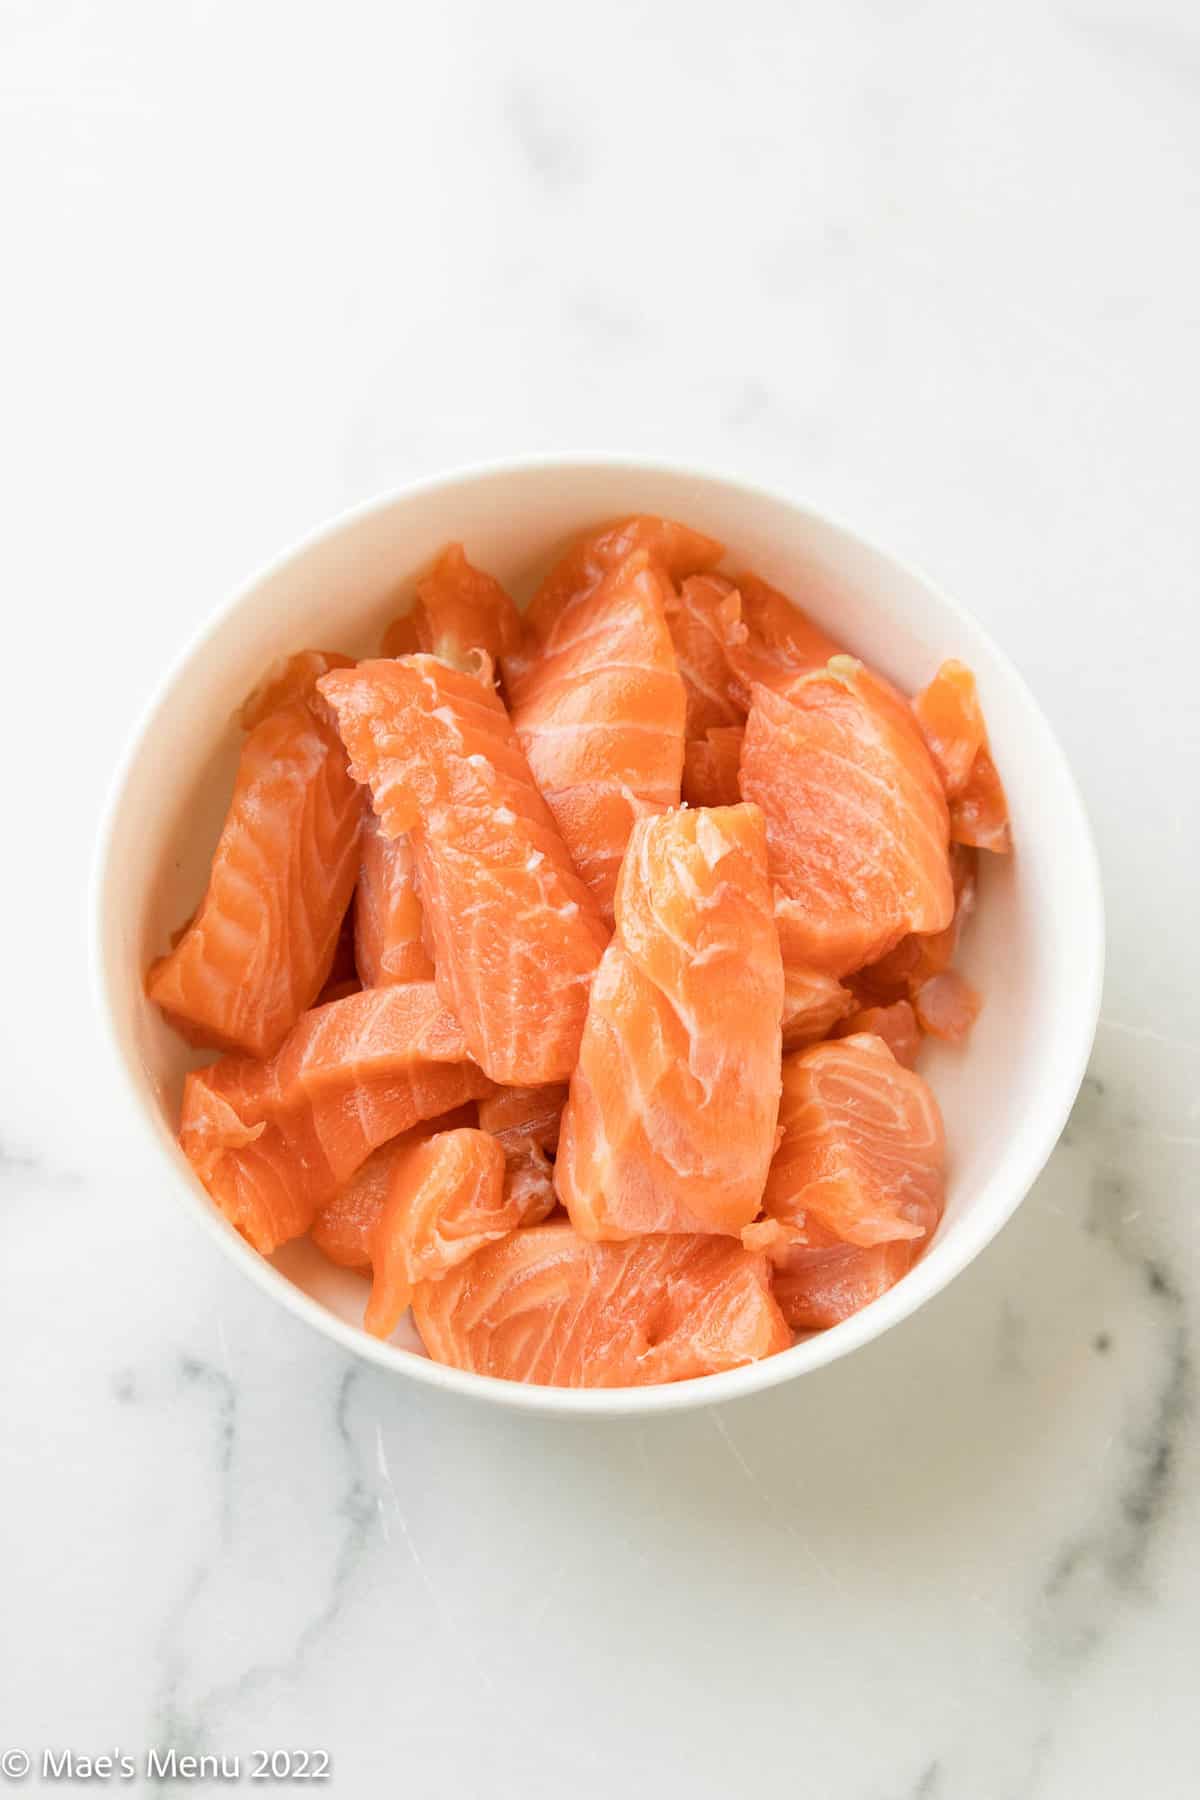 A small white dish of sliced salmon.